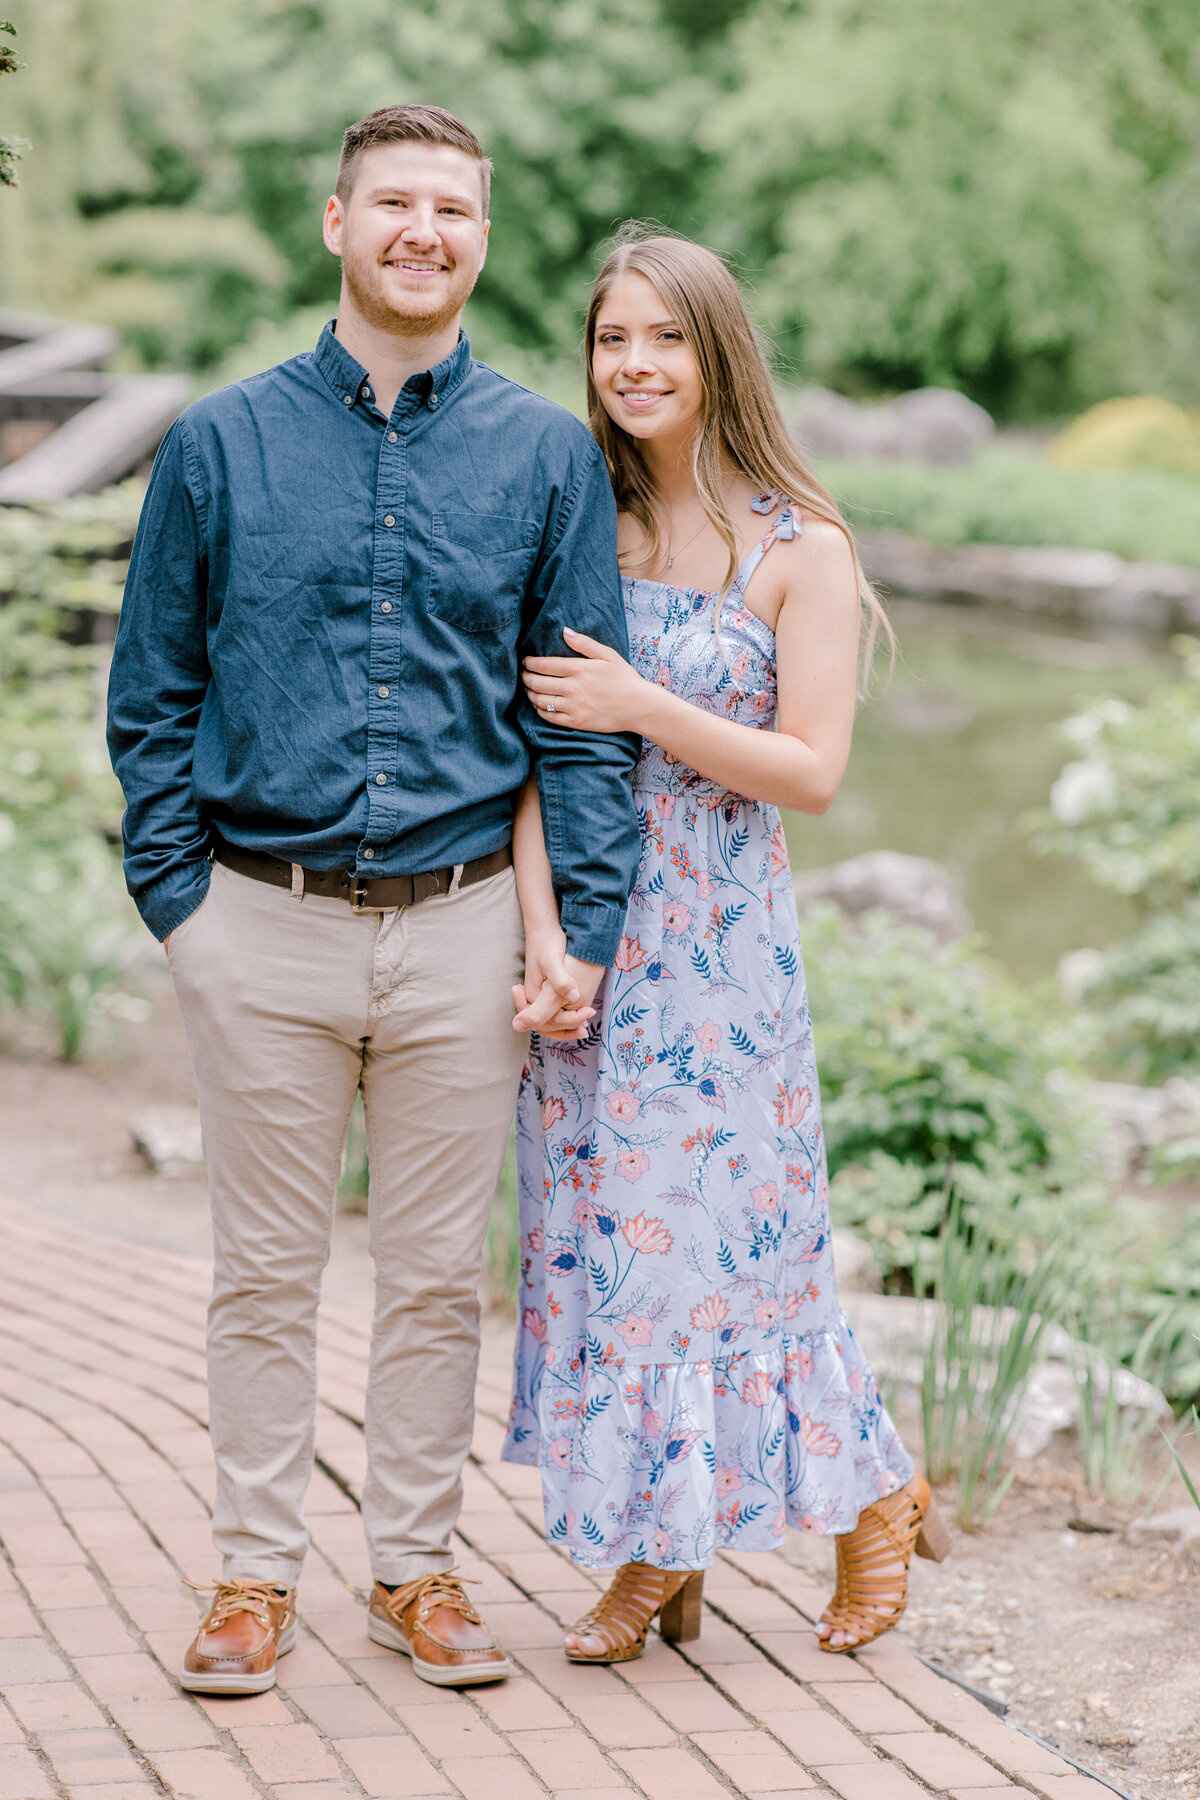 Hershey Garden Engagement Session Photography Photo-19